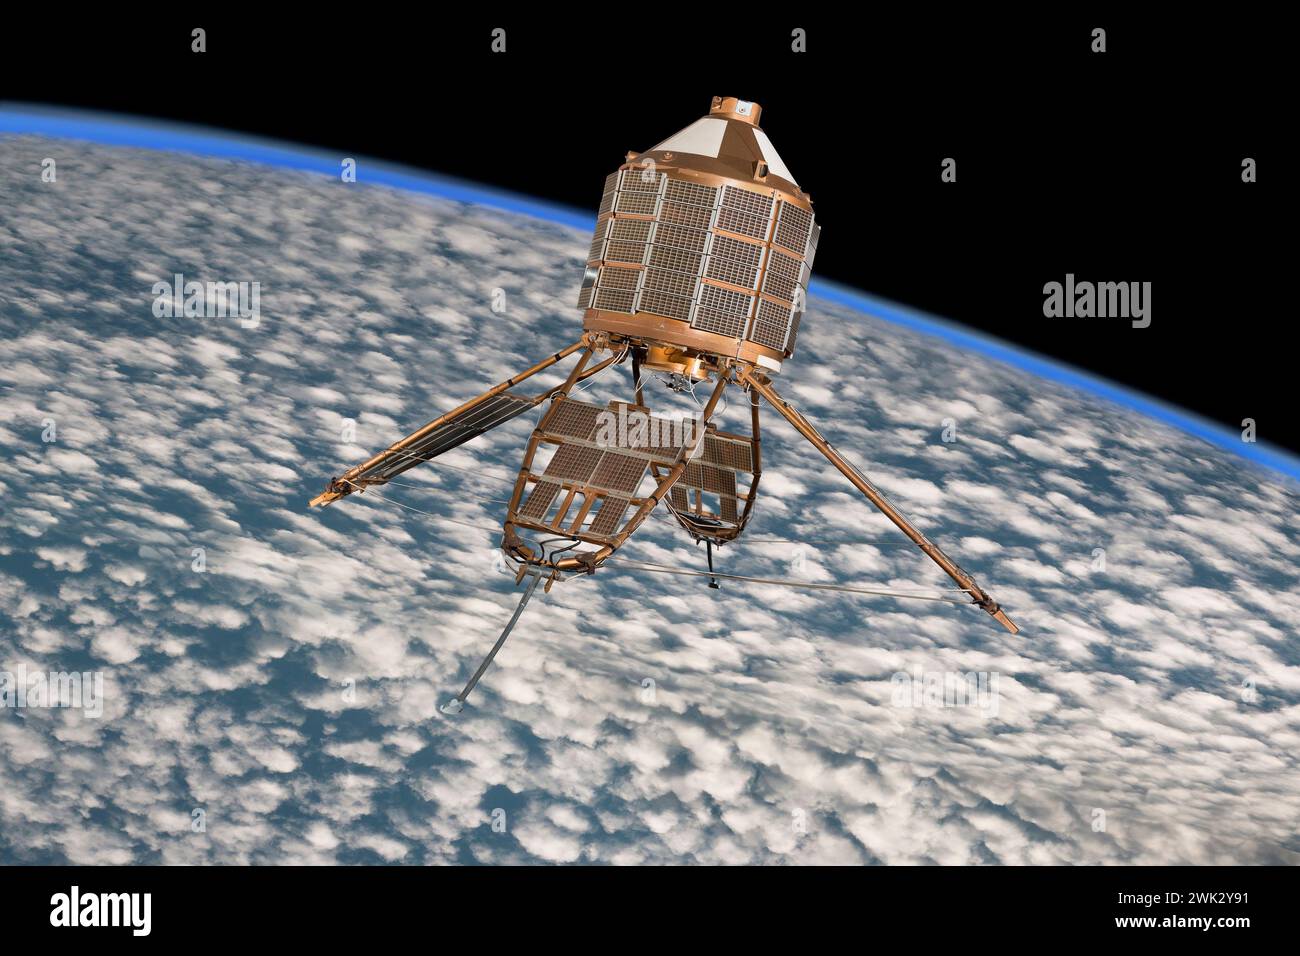 Model of Ariel scientific & research space satellite above Earth & clouds. Experiments on electro magnetic radiation & high energy charged particles. Stock Photo